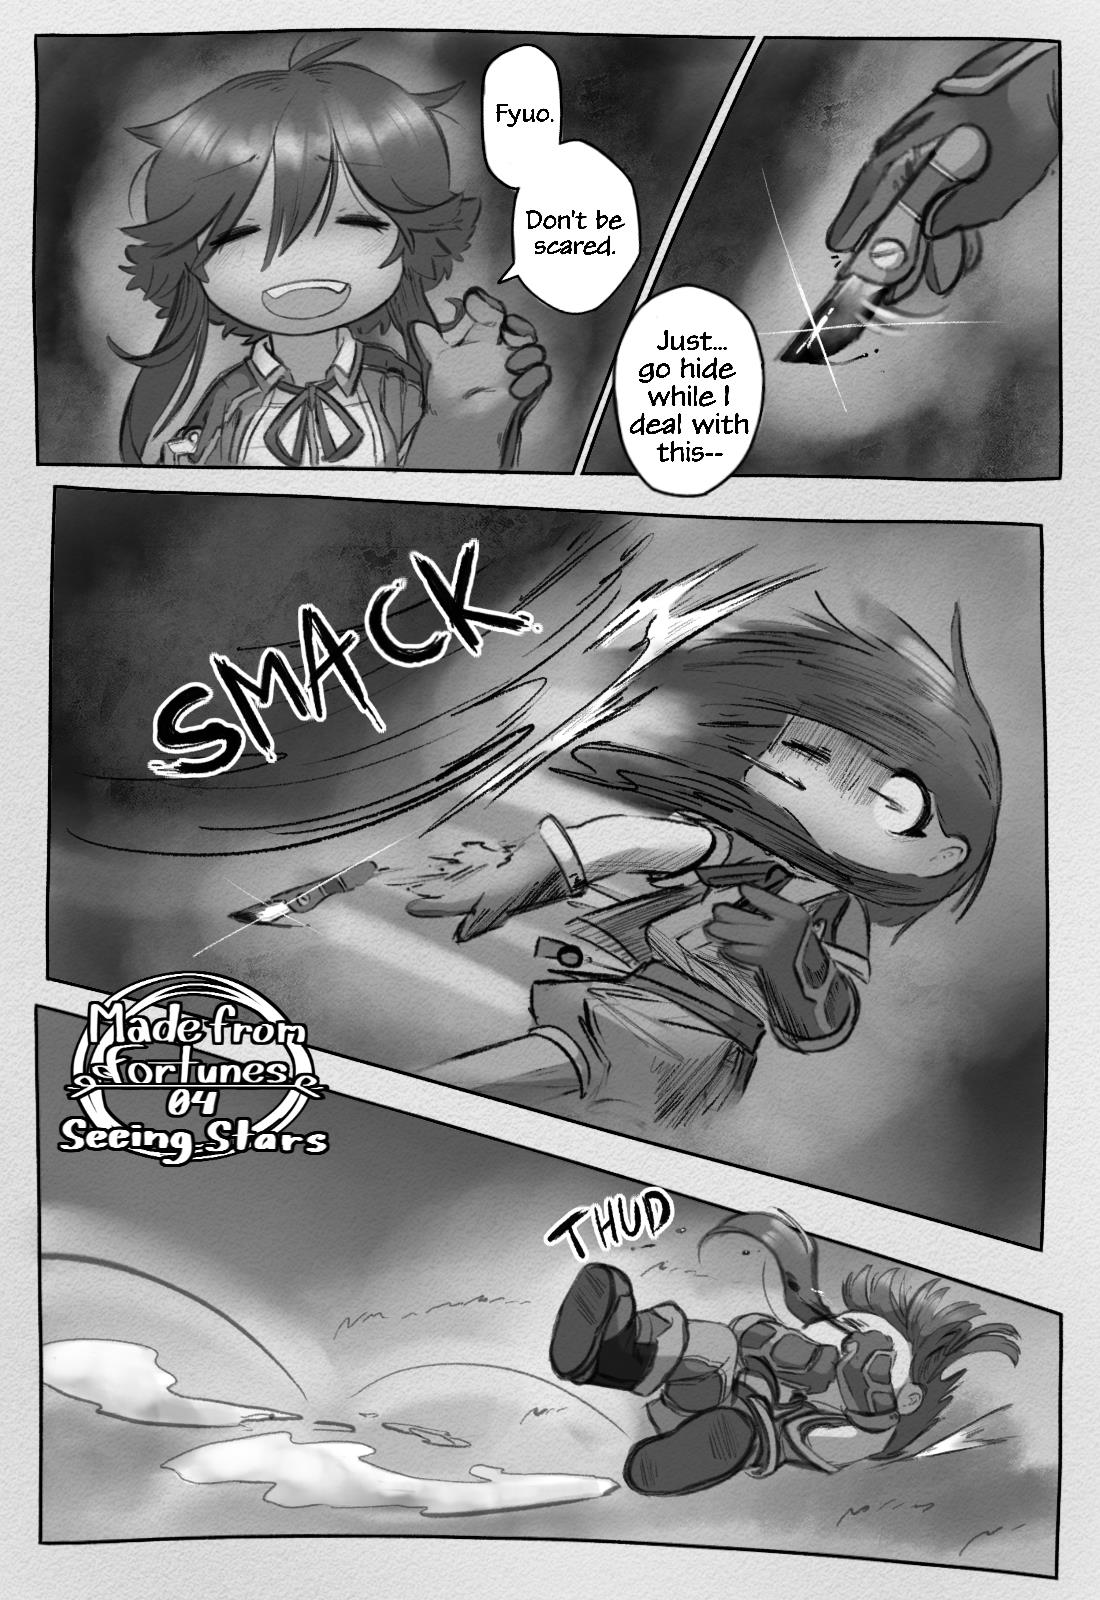 Made From Fortunes (Made In Abyss Fanmade Comic) - Page 1